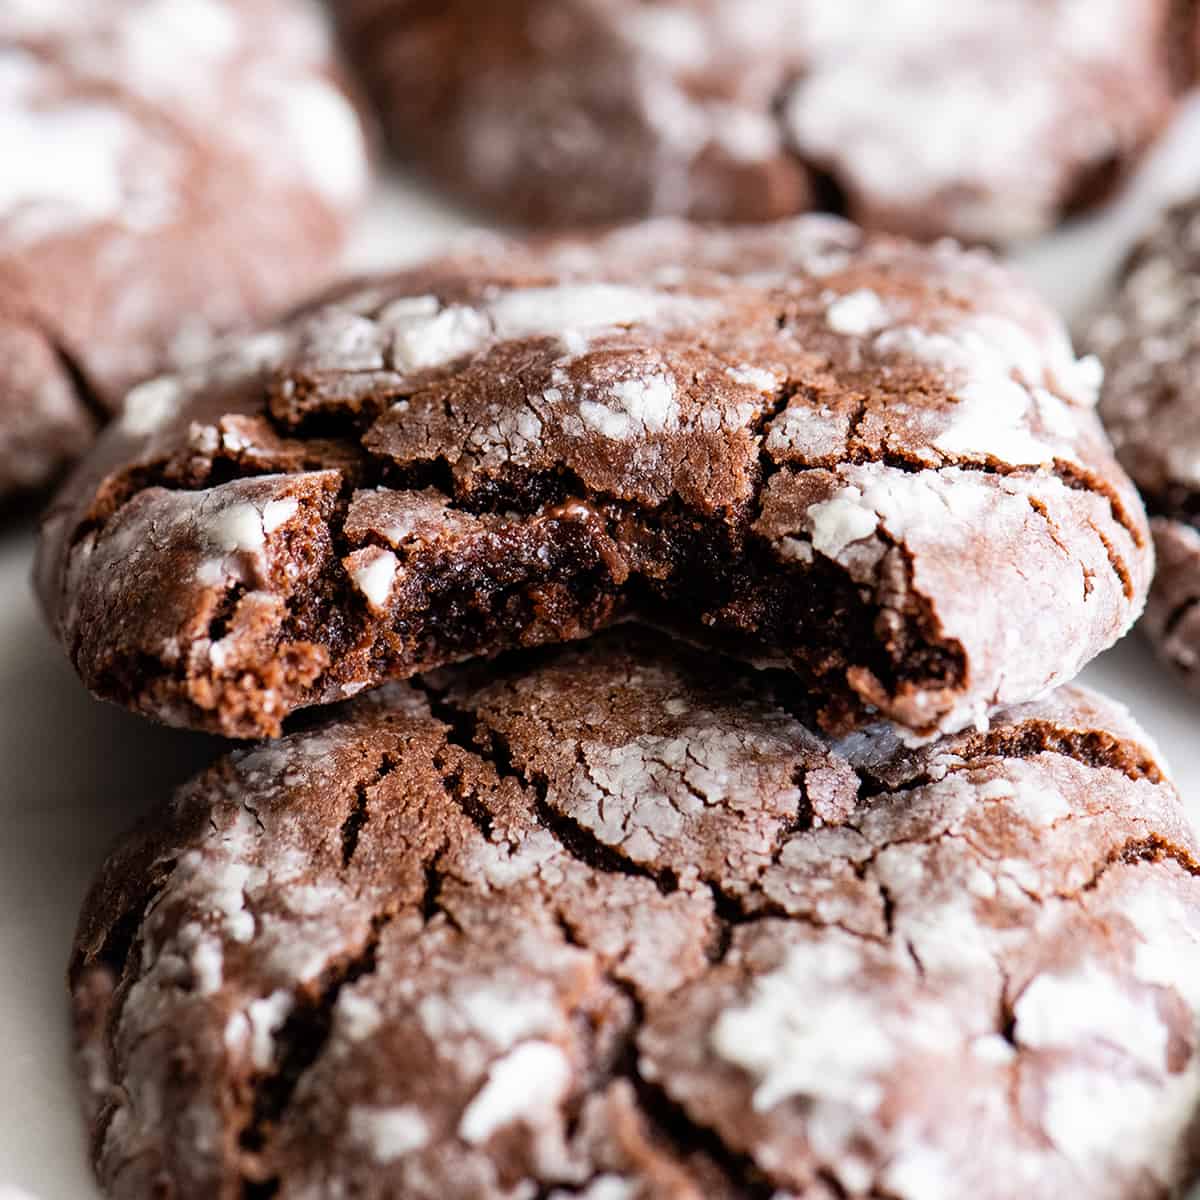 up close front view of a Chocolate Crinkle Cookie with a bite taken out of it